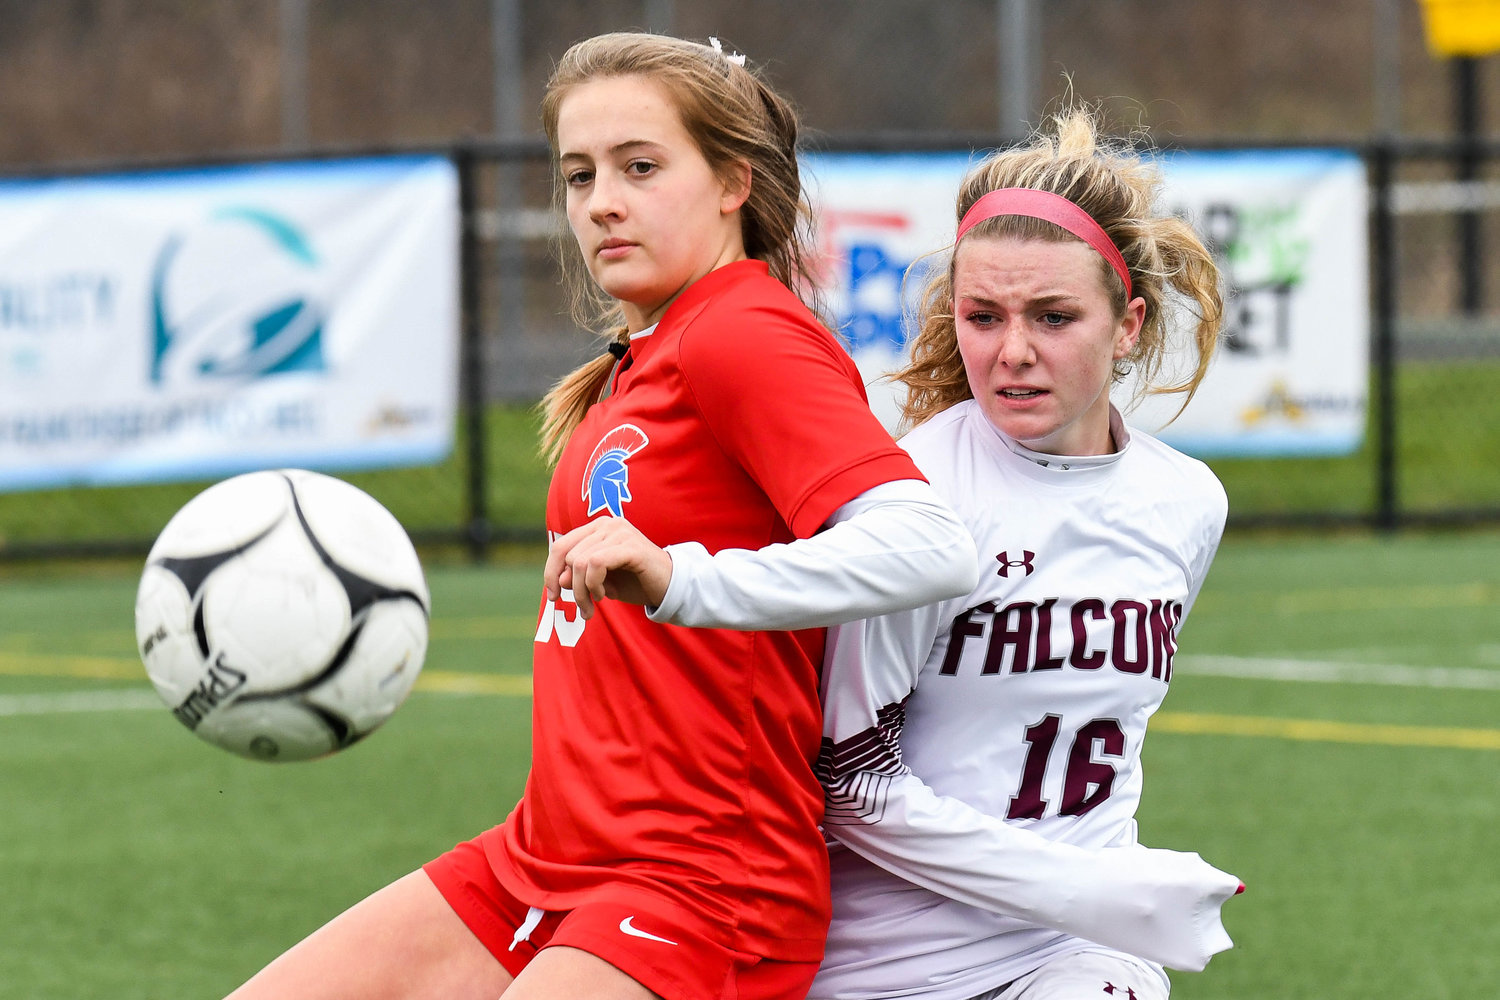 New Hartford's Anna Rayhill, left, attempts to settle a loose ball with Albertus Magnus player Stephanie Koblish moving in on her during the Class A state final on Sunday at Tompkins-Cortland Community College. The Spartans lost 3-1.